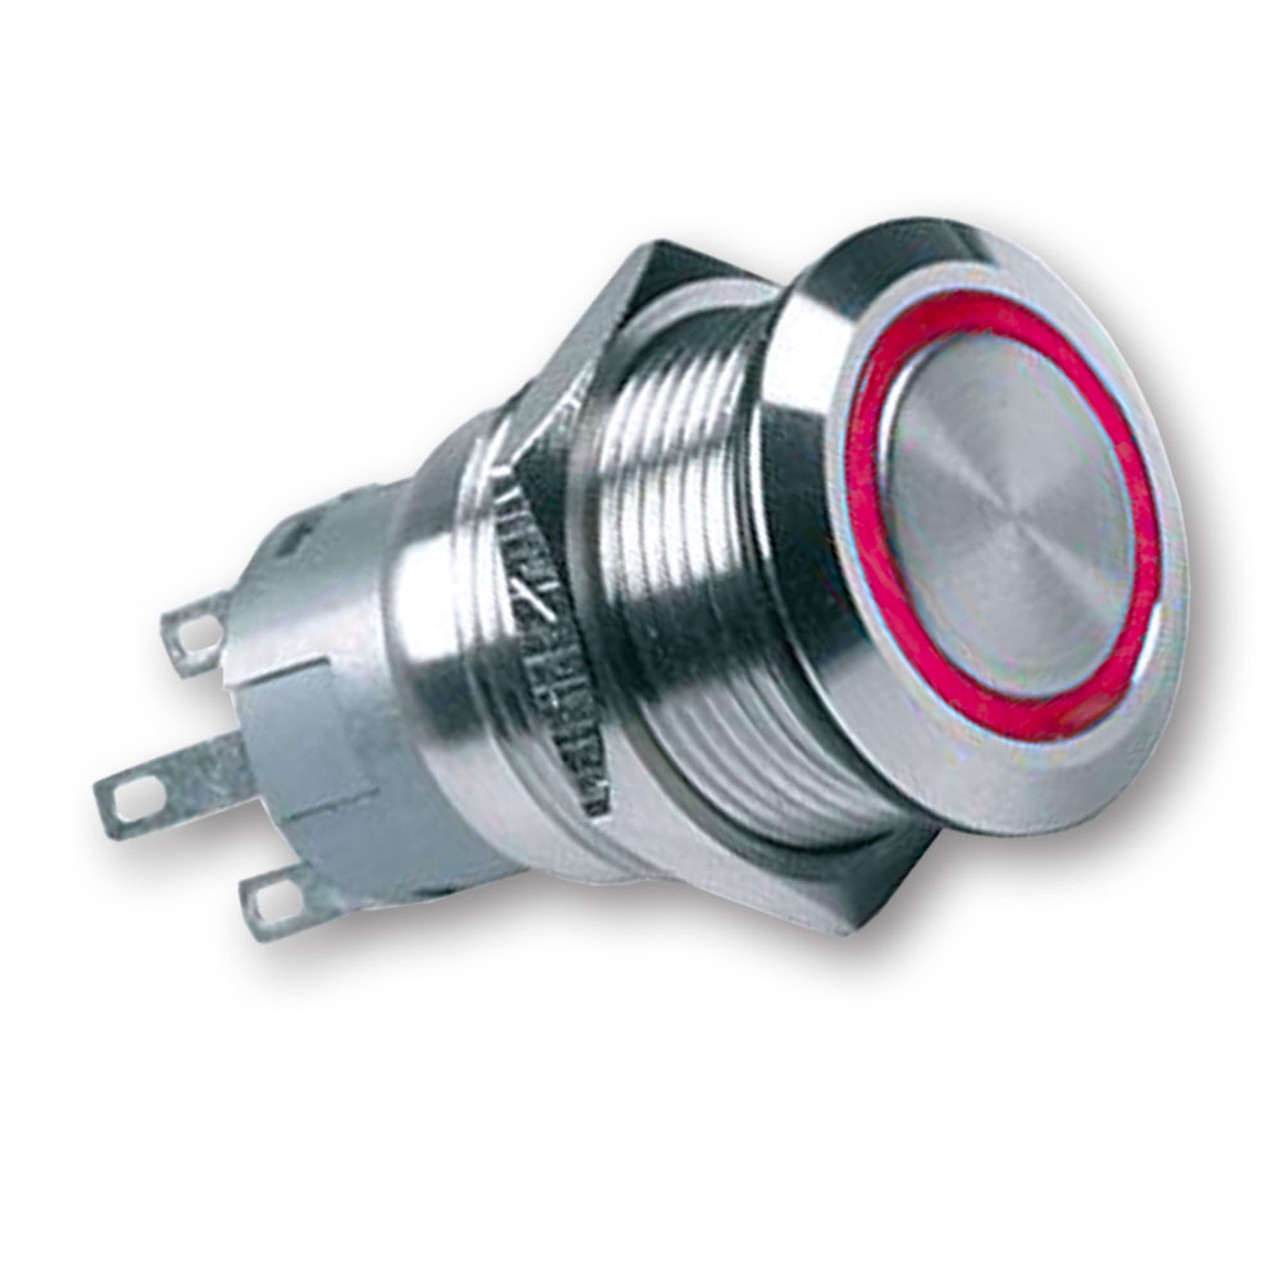 Mega LED - Push Button - Waterproof IP67, Stainless Steel, Latching Illuminated, 12V Red LED (32358-R12L) - Apollo Lighting